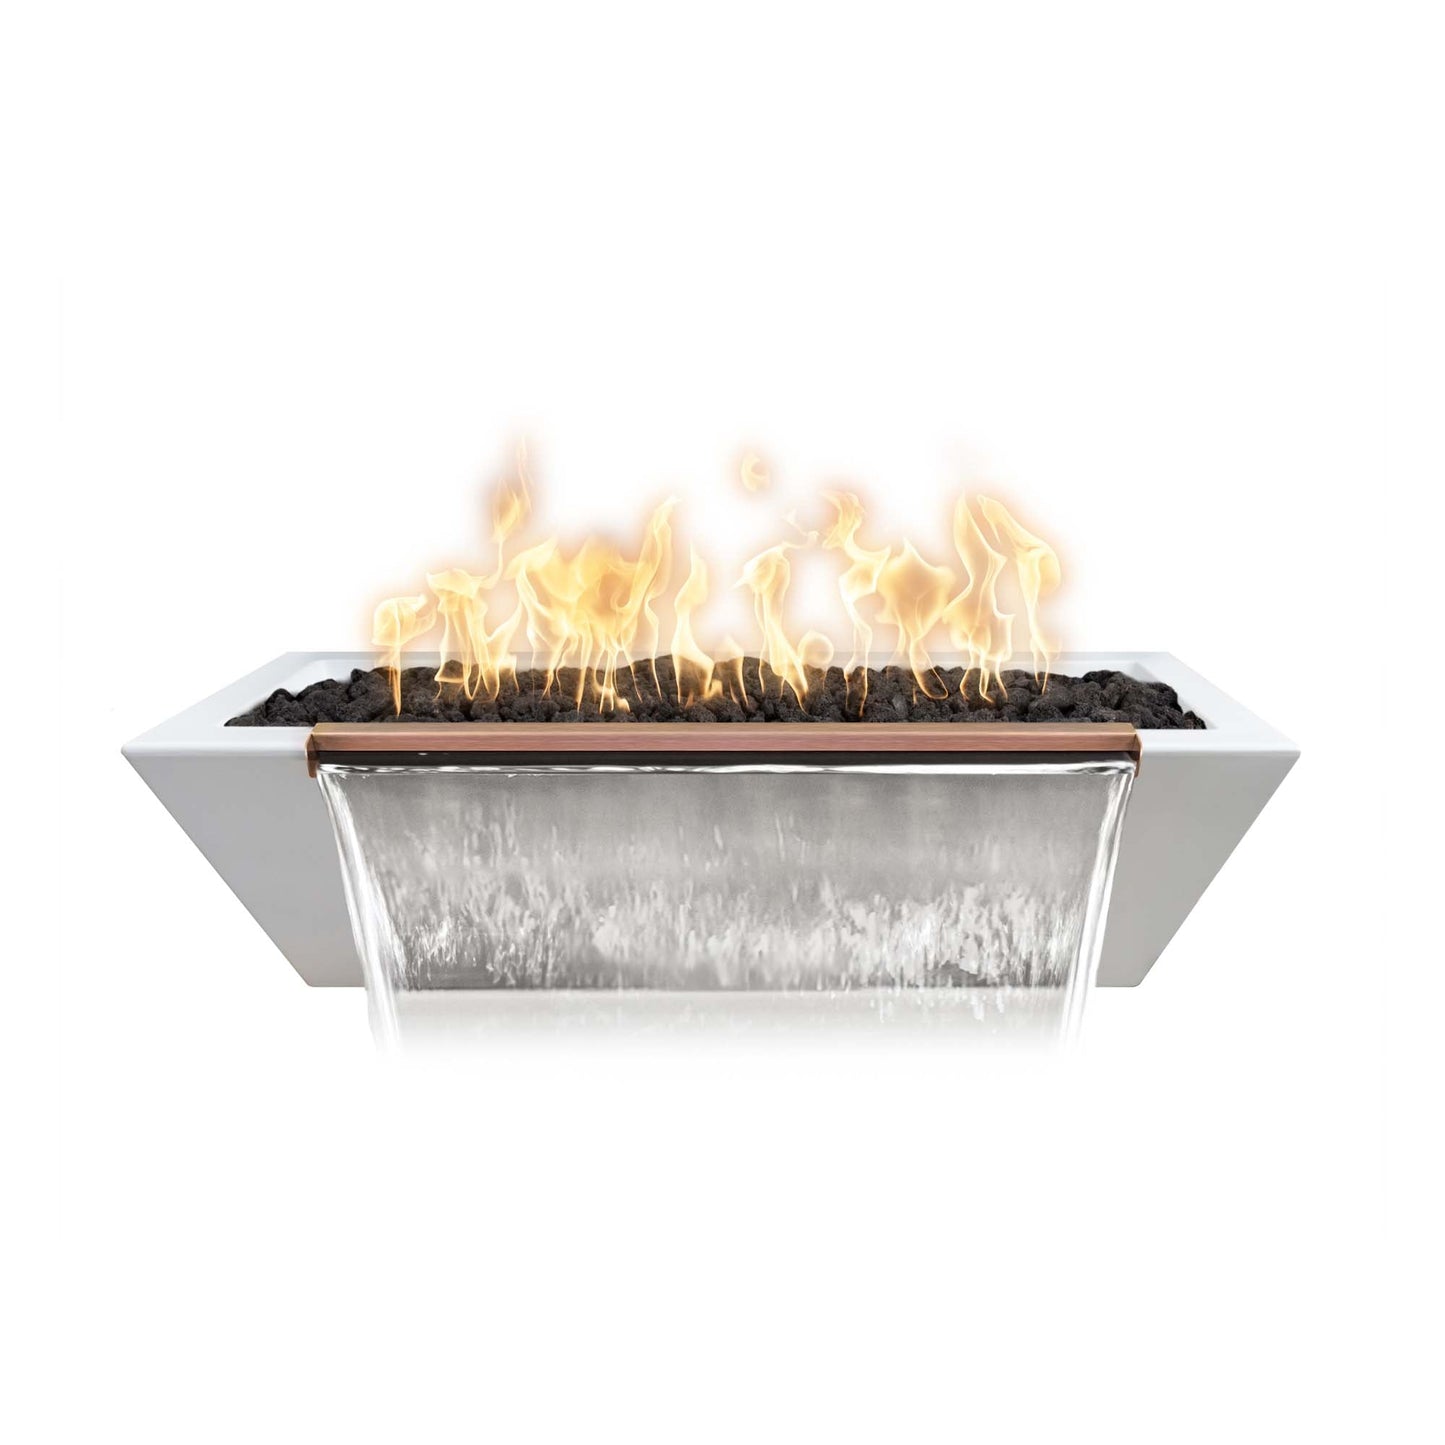 The Outdoor Plus Linear Maya 72" Metallic Pearl GFRC Concrete Liquid Propane Fire & Water Bowl with Match Lit with Flame Sense Ignition